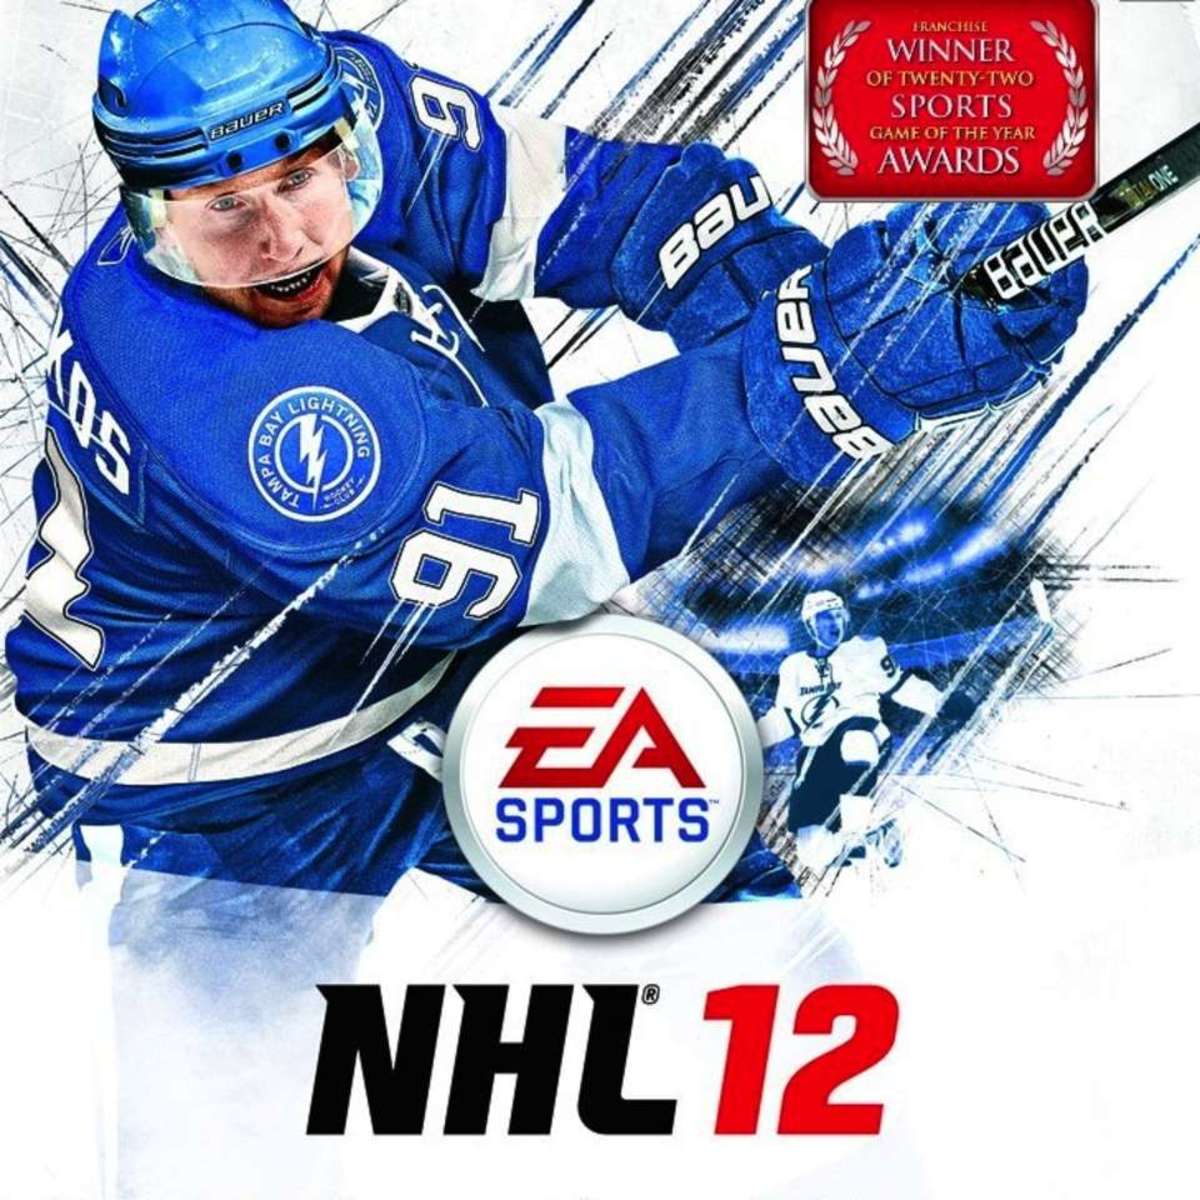 Steven Stamkos on the NHL 12 cover.